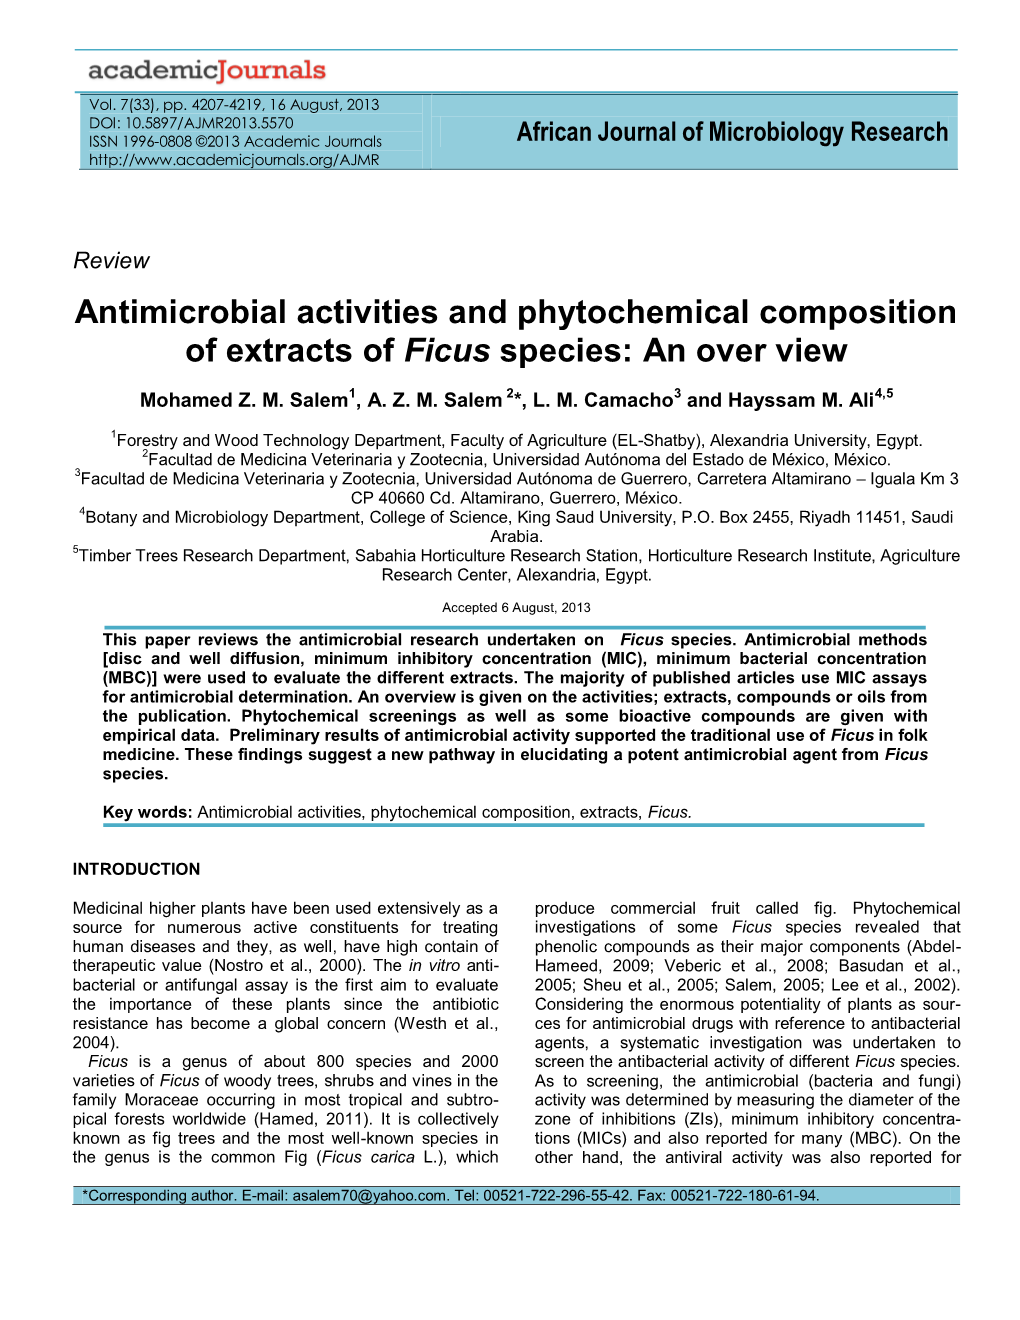 Antimicrobial Activities and Phytochemical Composition of Extracts of Ficus Species: an Over View